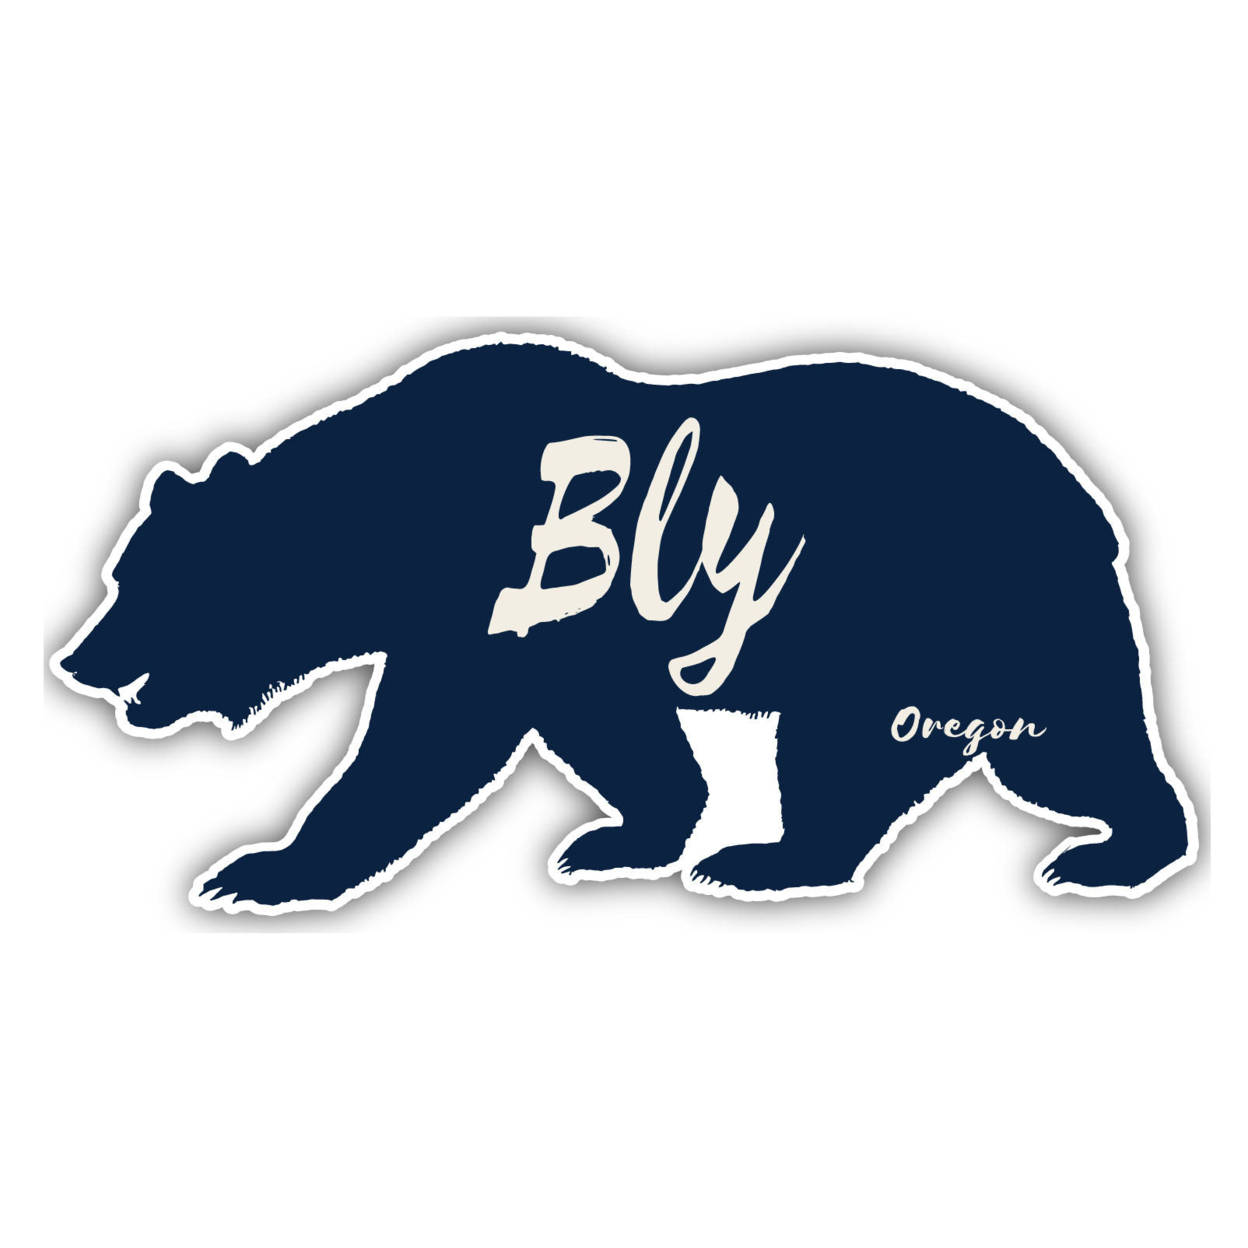 Bly Oregon Souvenir Decorative Stickers (Choose Theme And Size) - 4-Pack, 10-Inch, Great Outdoors